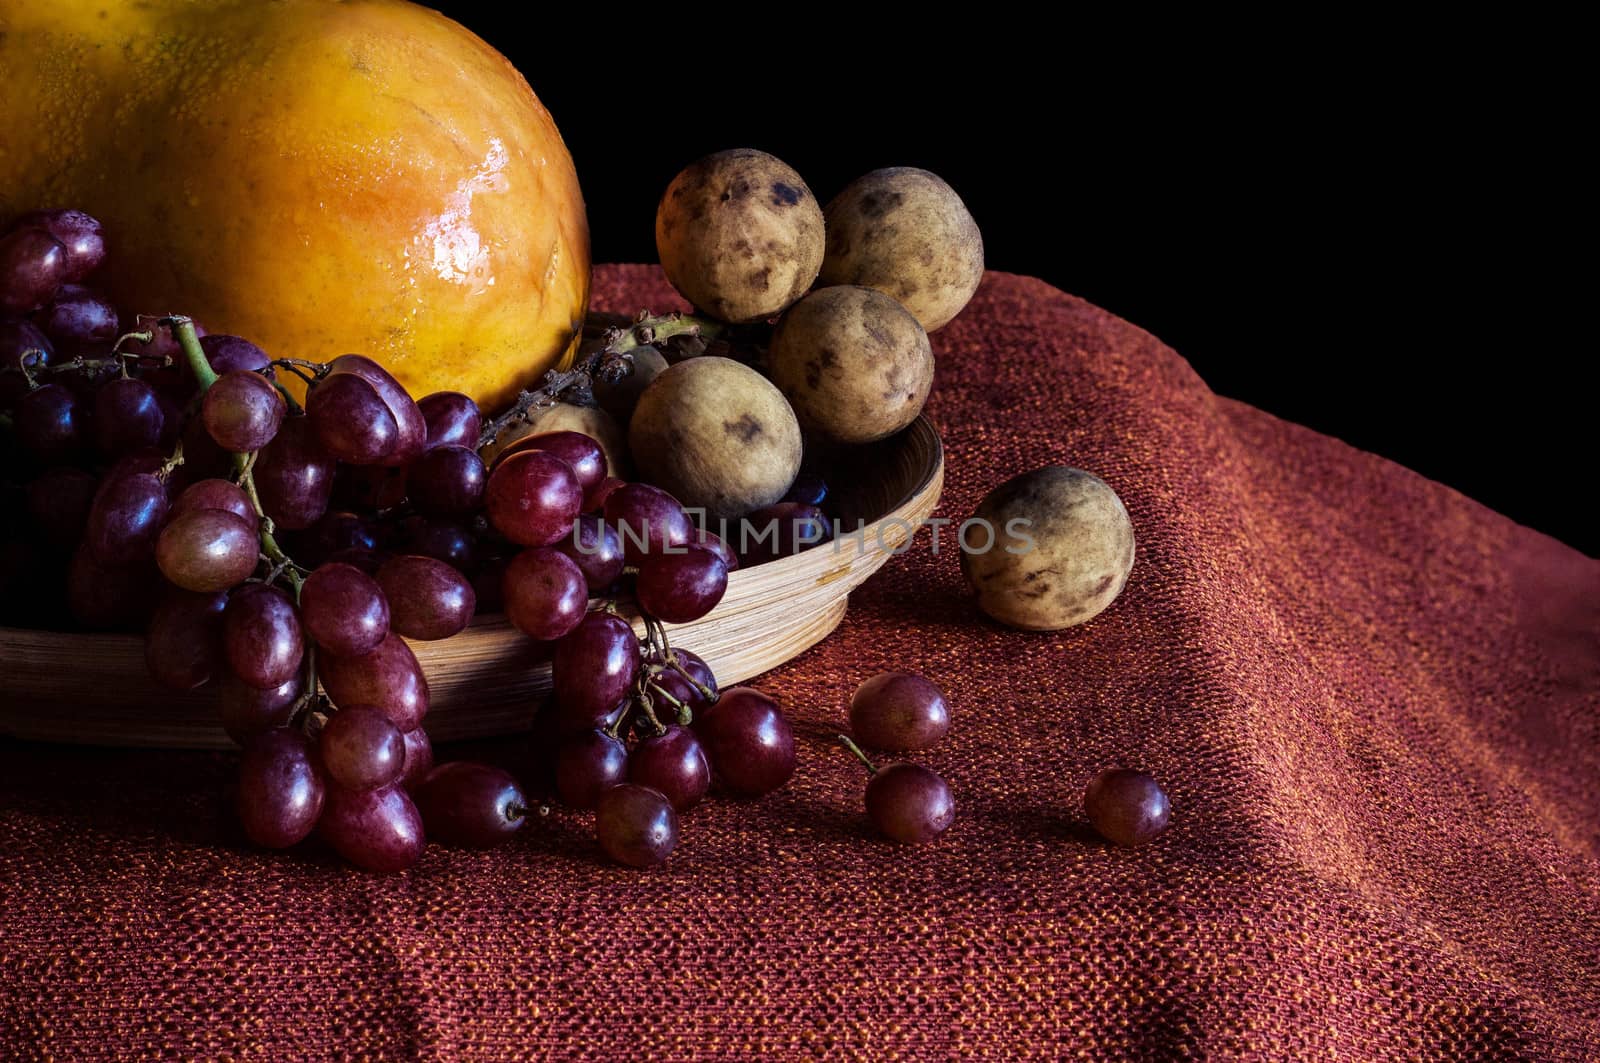 Grapes and papaya on the table with a black background.